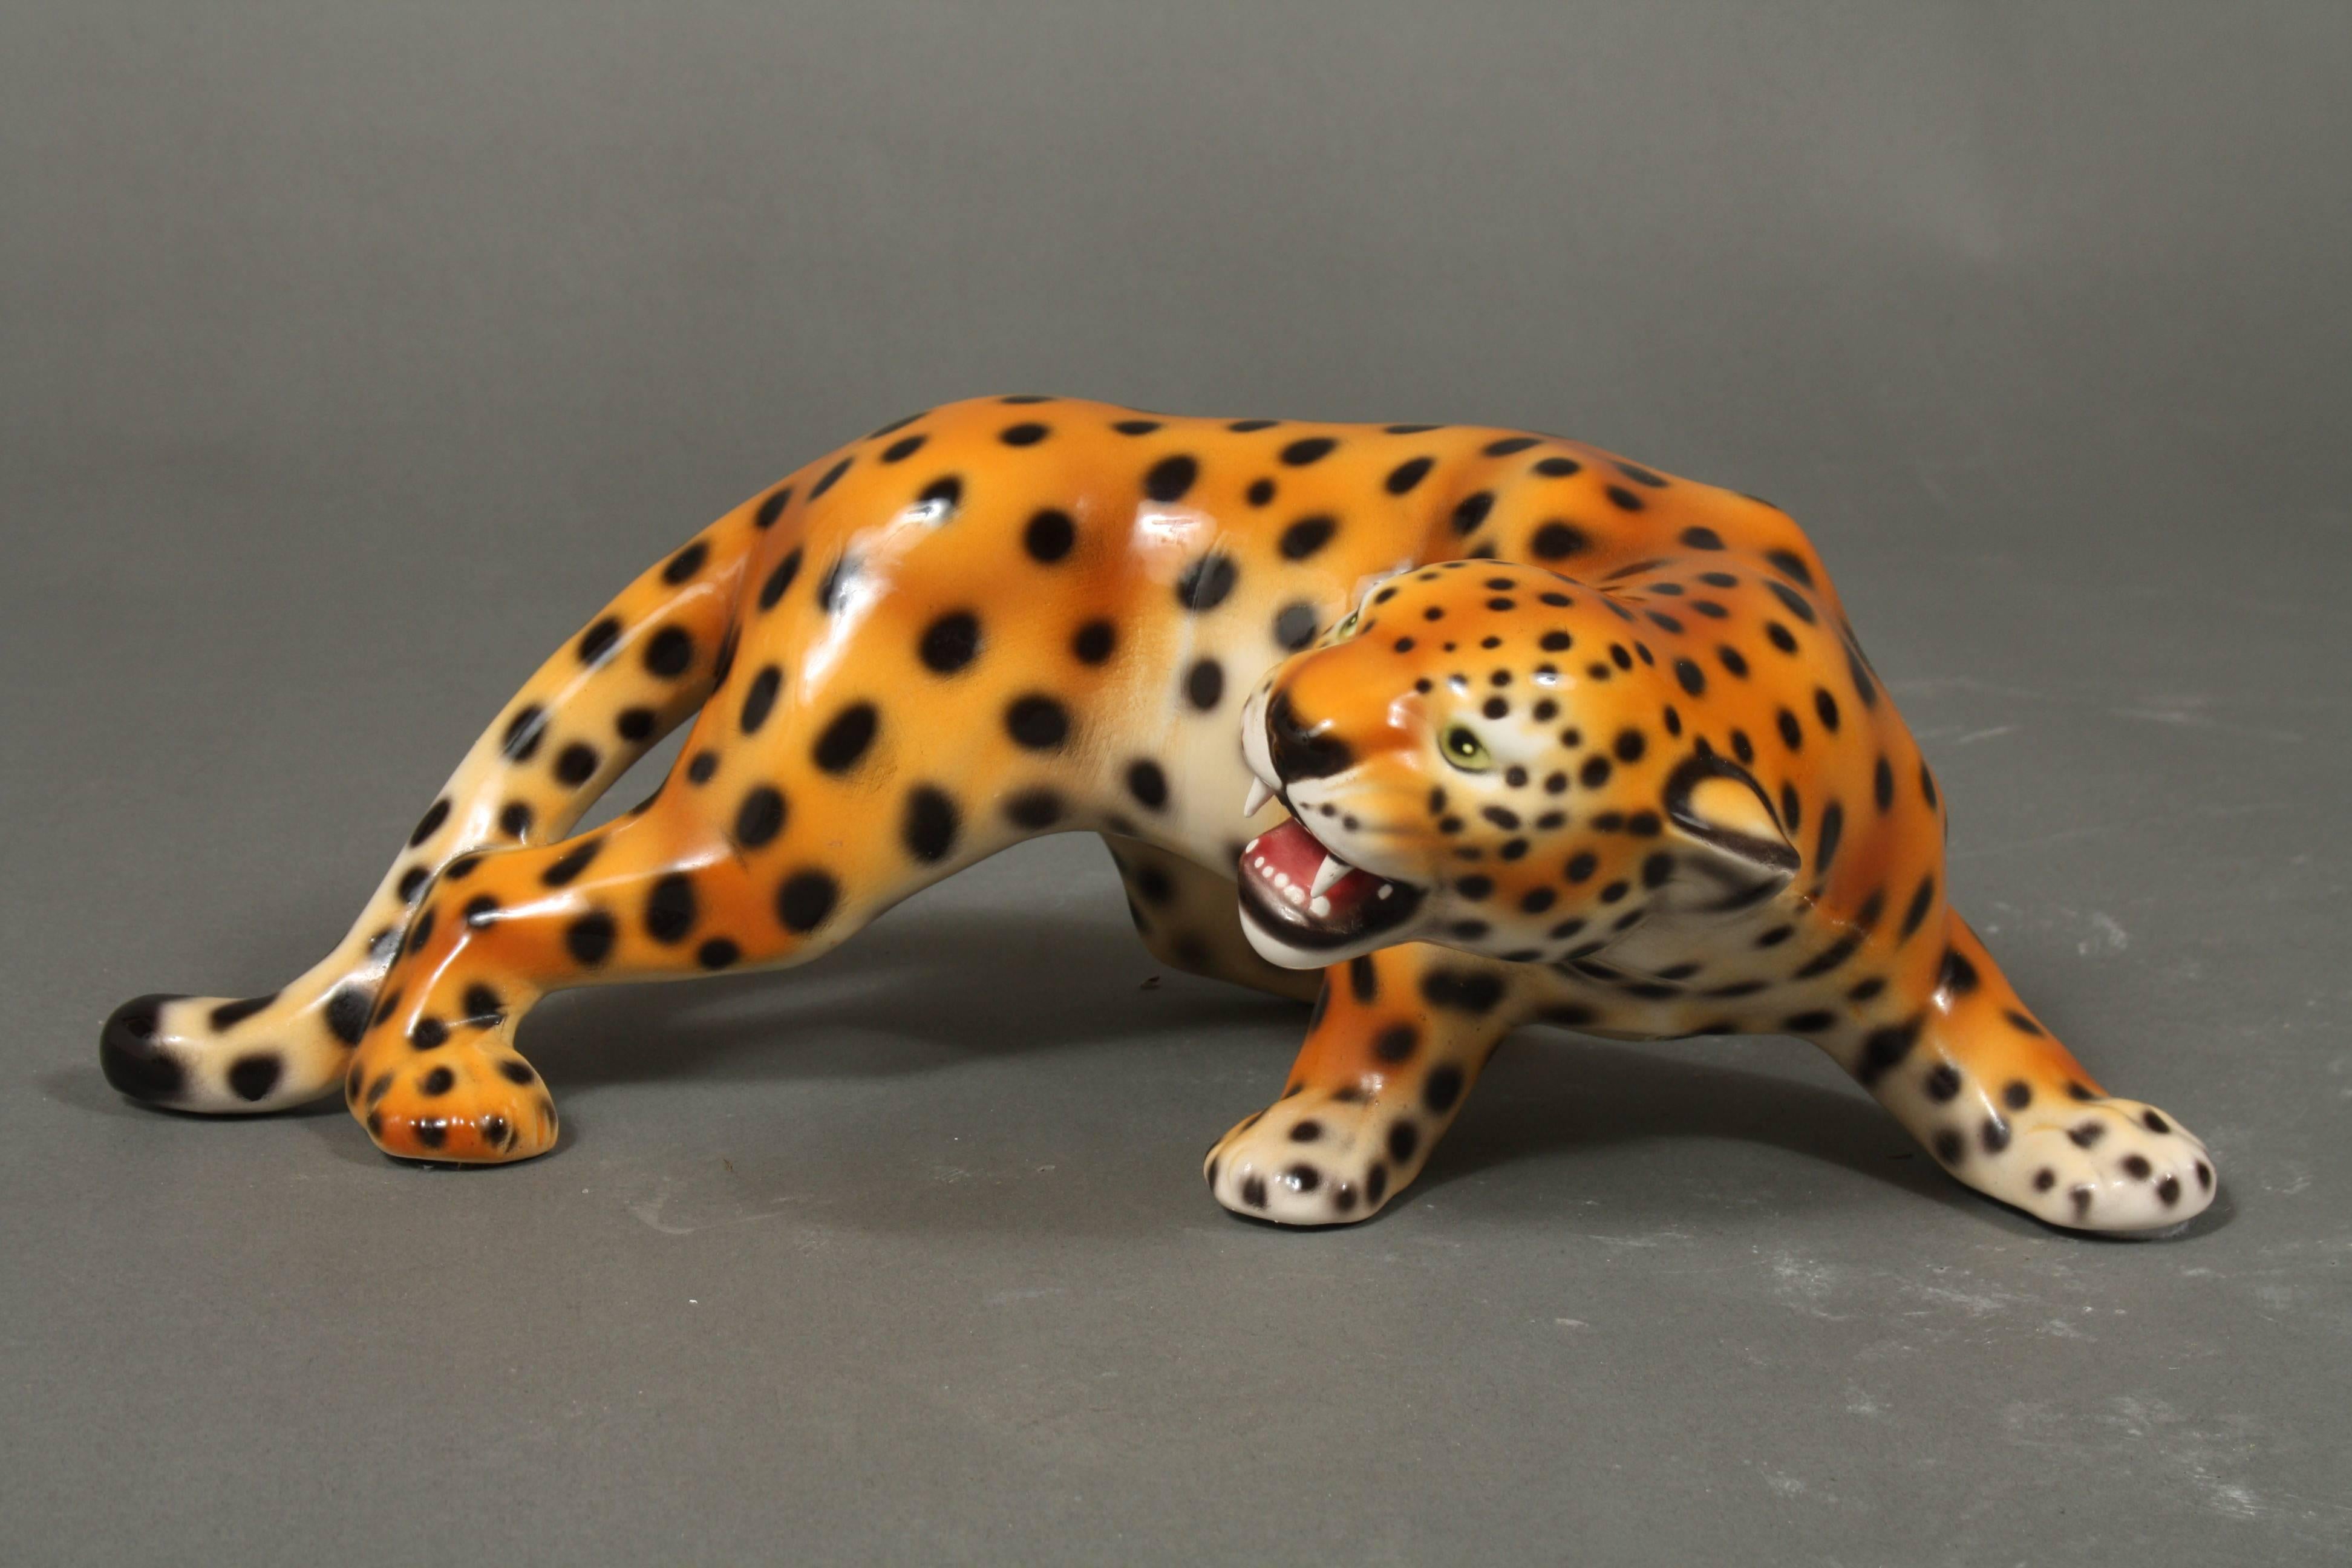 Porcelain sculpture of a cheetah, Italy.